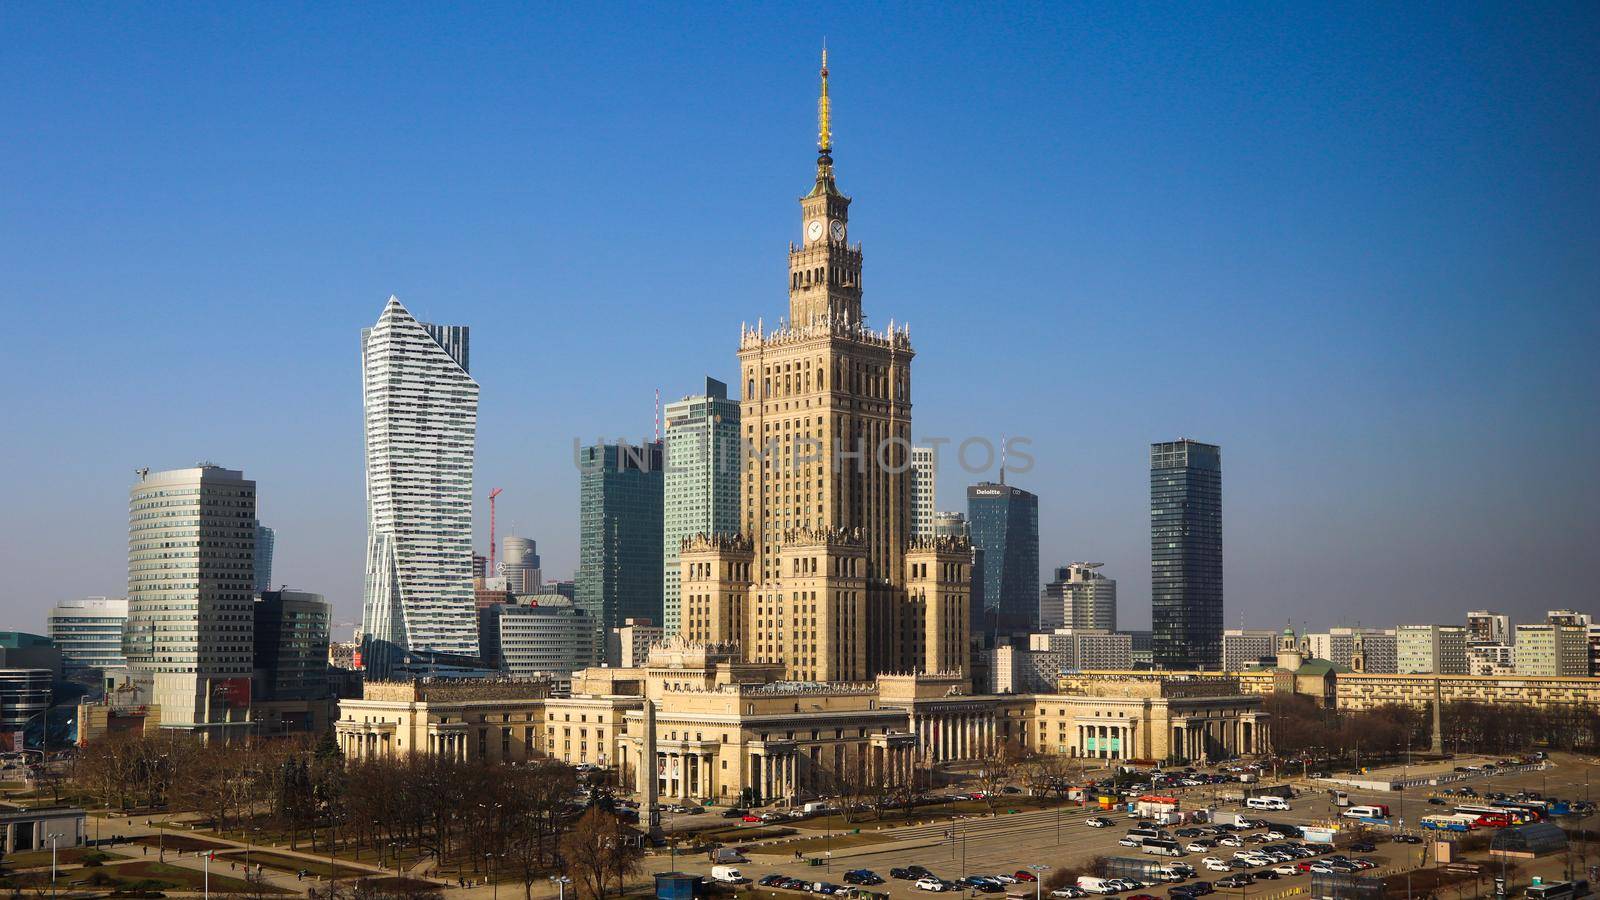 Warsaw / Poland - February 28, 2019: Aerial view center of the city. Palace of Culture and Science and business skyscrapers